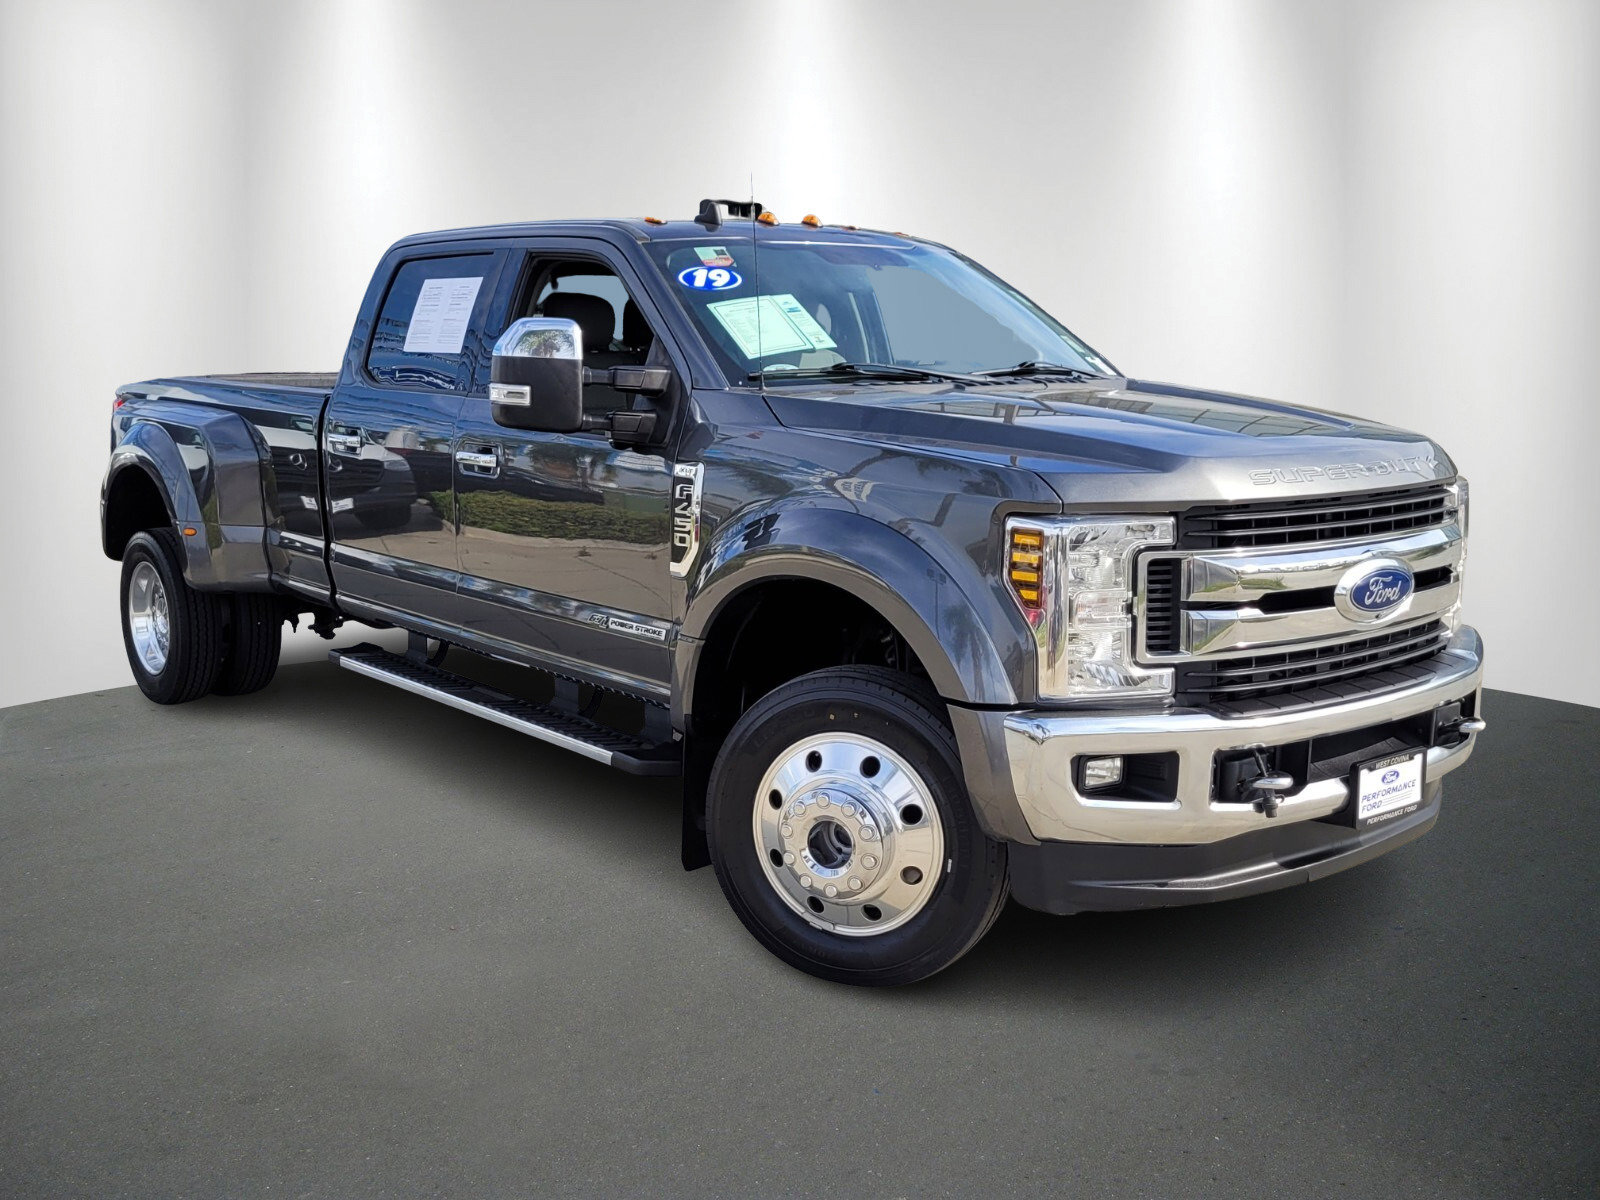 Pre-Owned 2019 Ford Super Duty F-450 DRW XL Crew Cab Pickup in Duarte  #P1707 | Nissan of Duarte